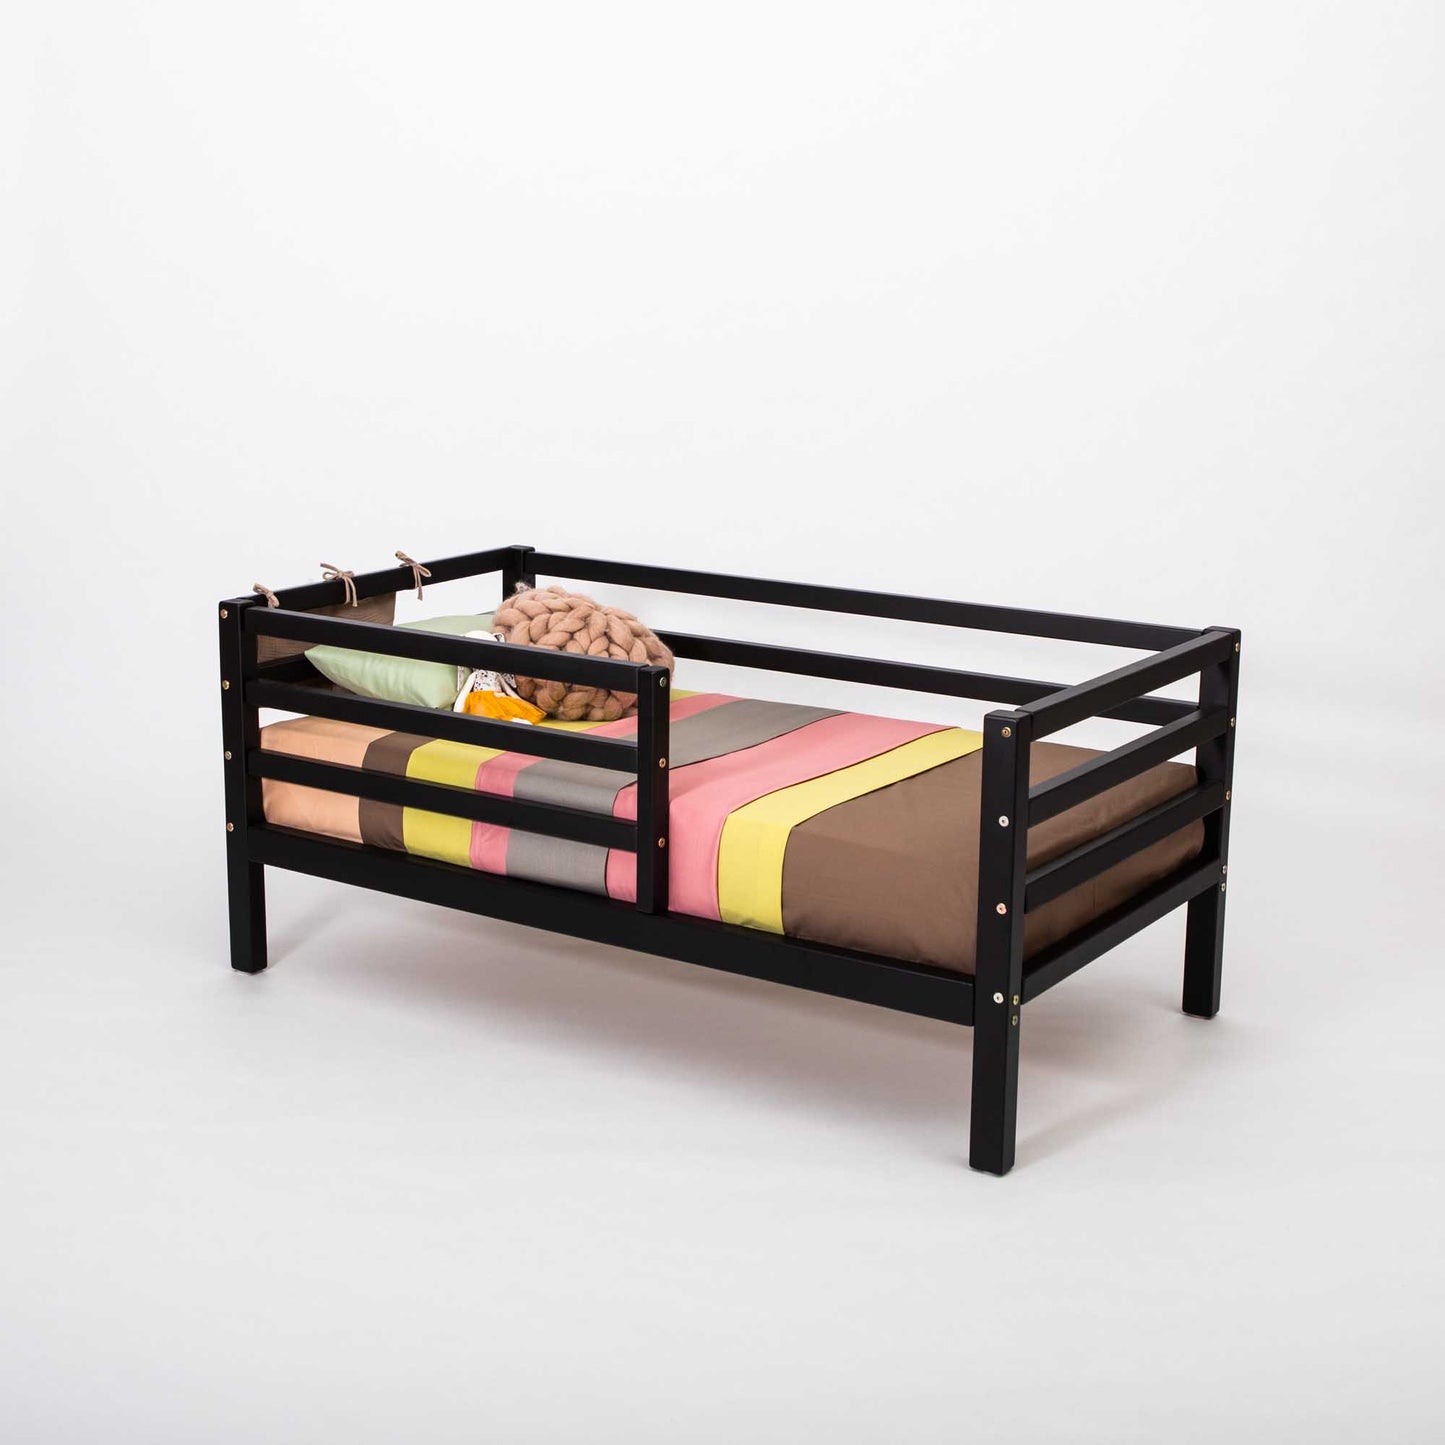 A Sweet Home From Wood Kids' bed on legs with a horizontal rail fence and a colorful bed sheet.